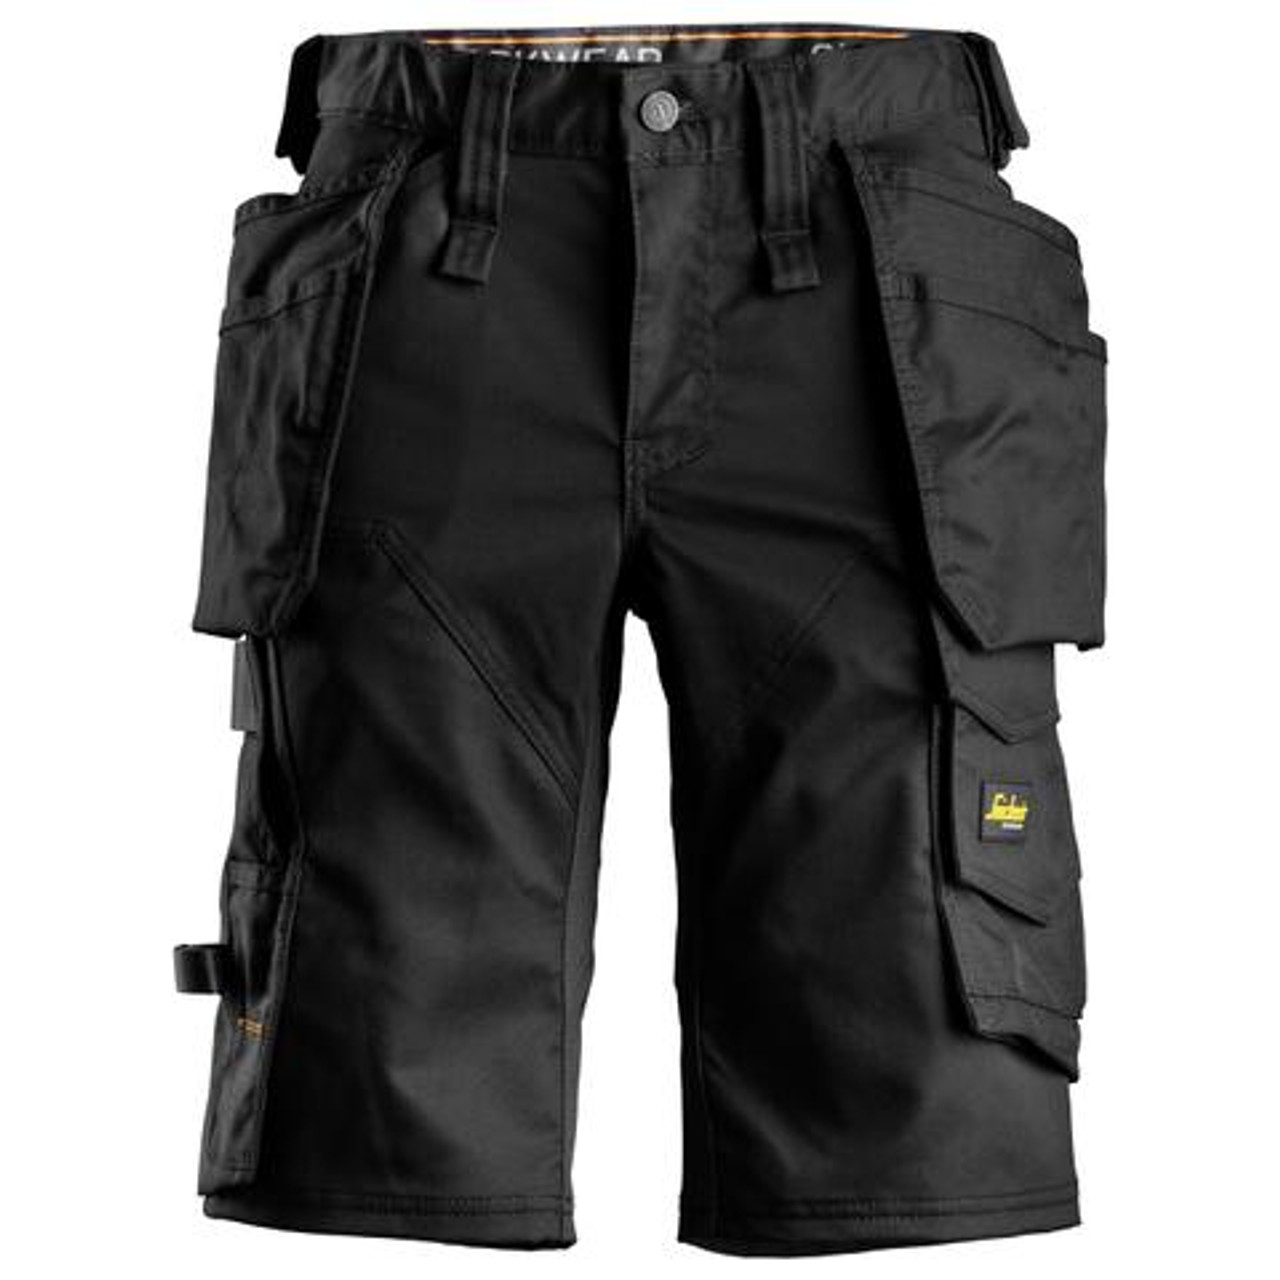 Buy online in Australia and New Zealand BLAKLADER Shorts for Electricians that are comfortable and durable.